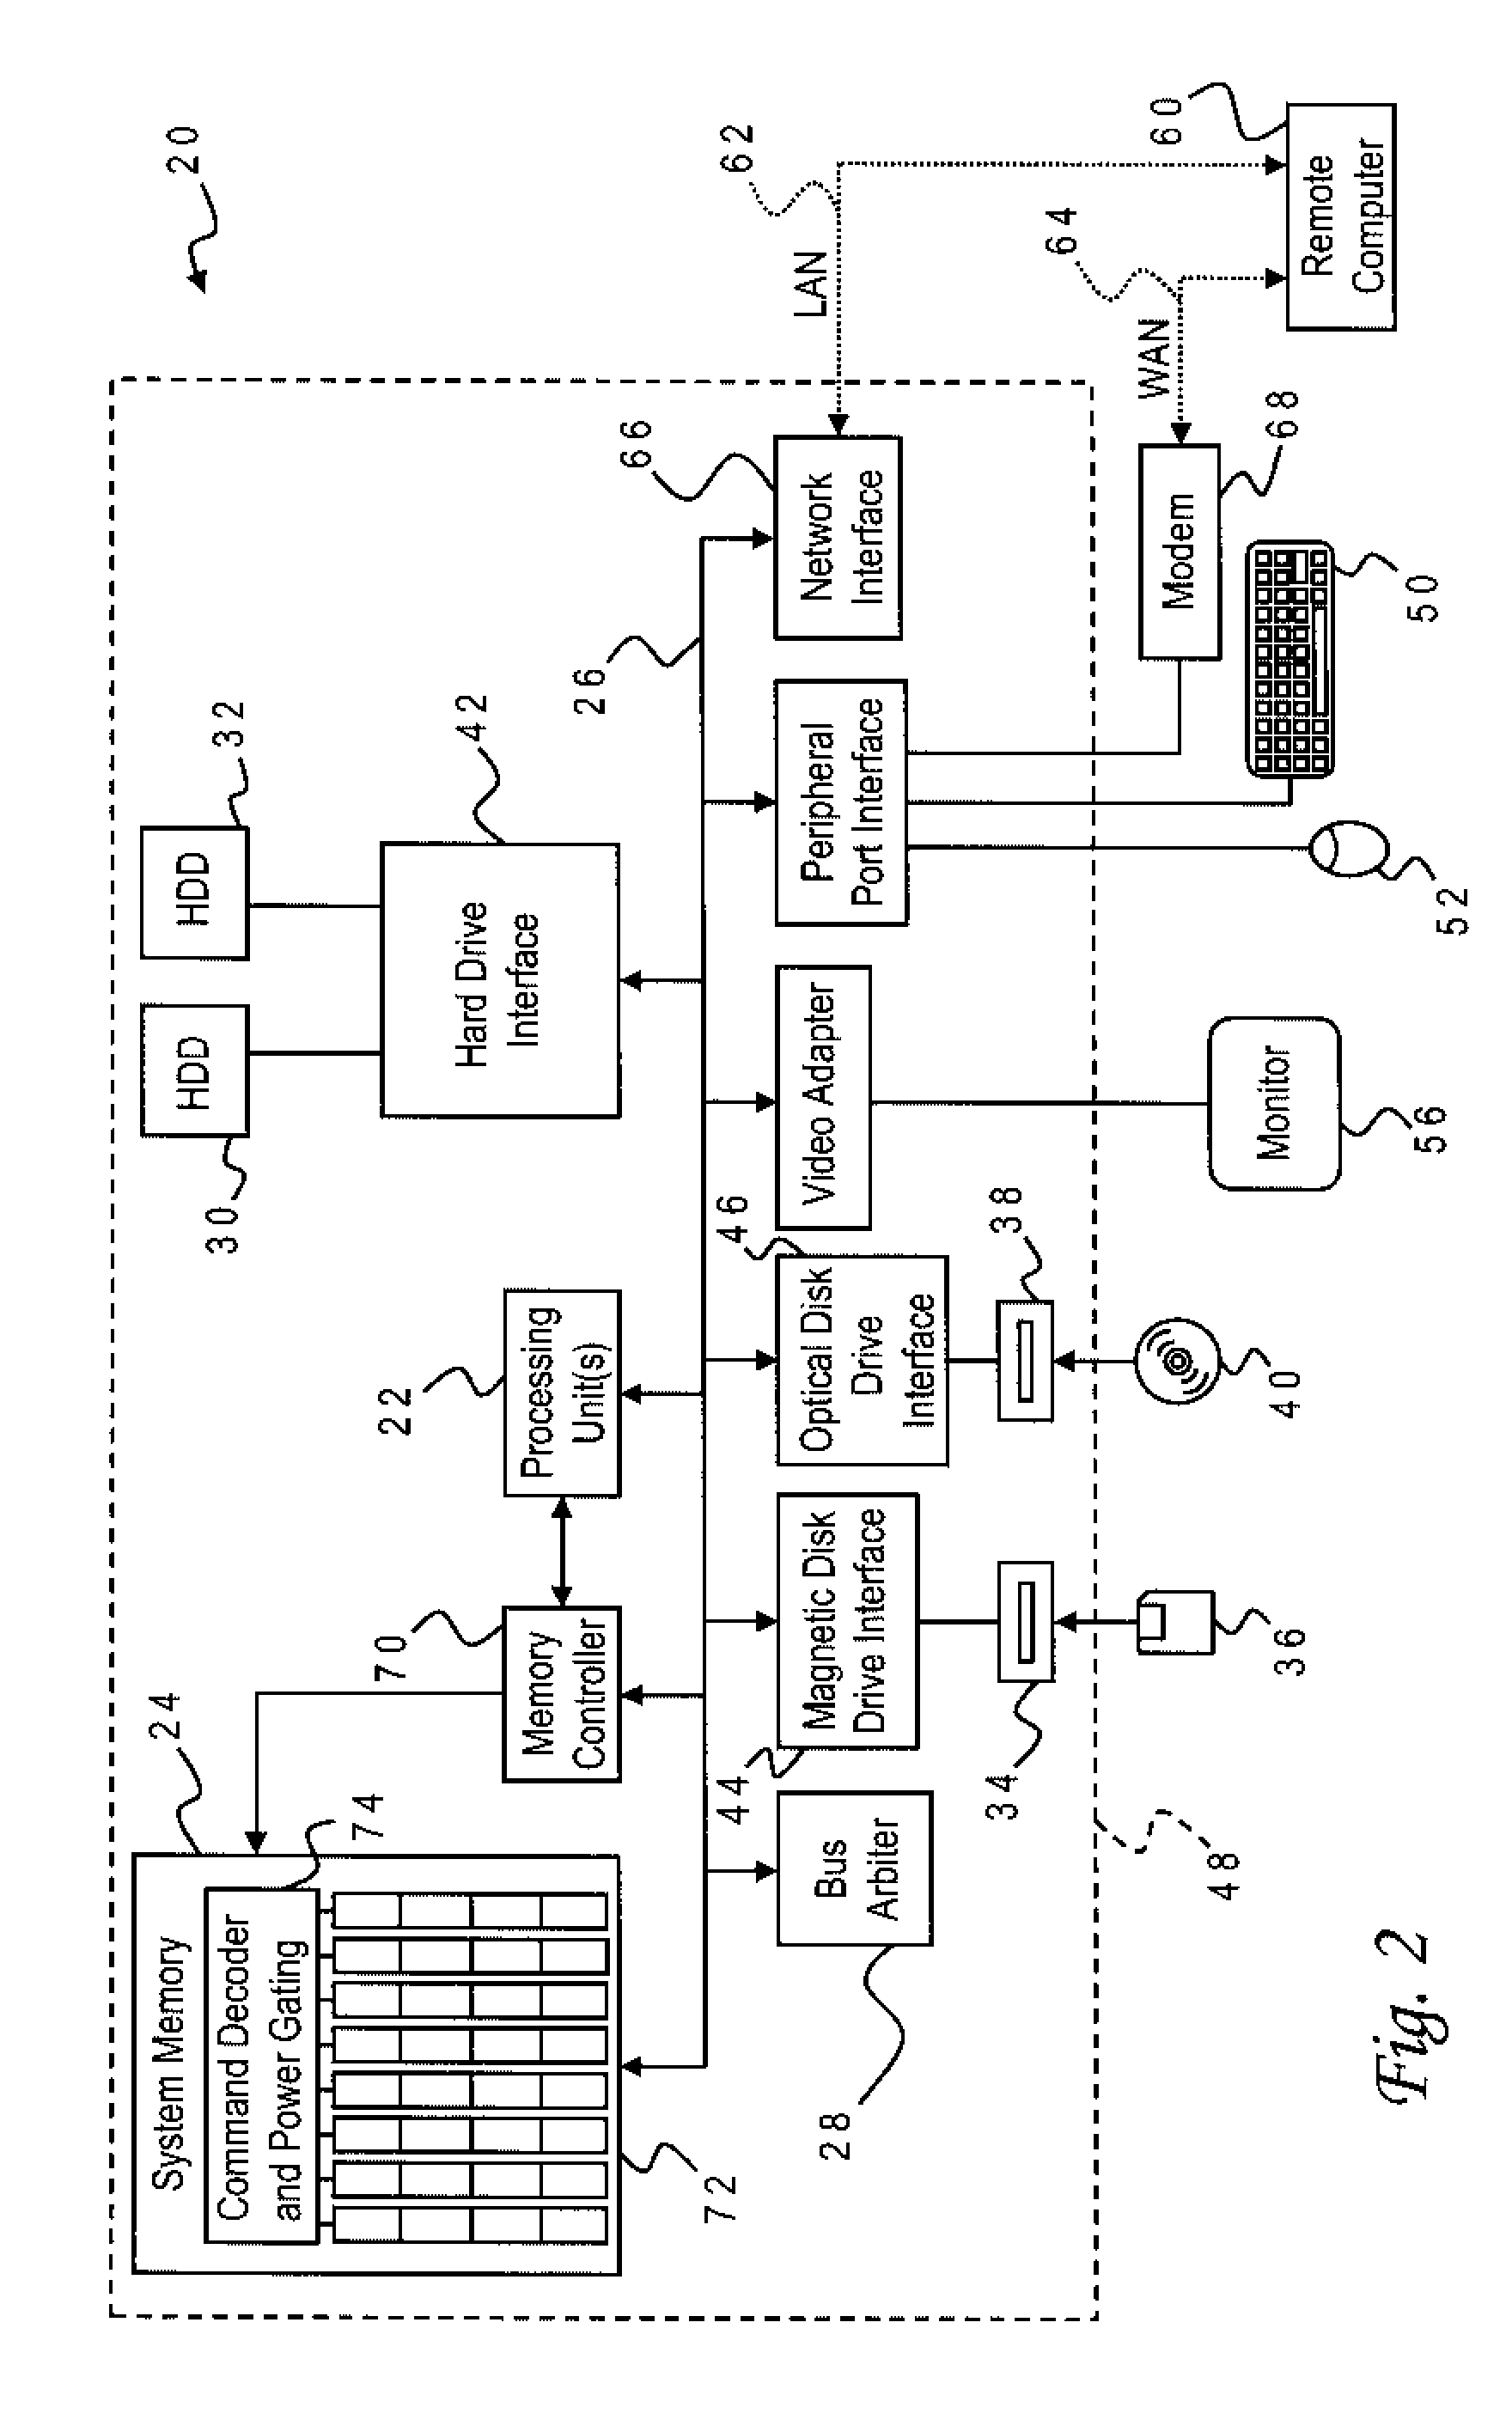 DRAM power management in a memory controller